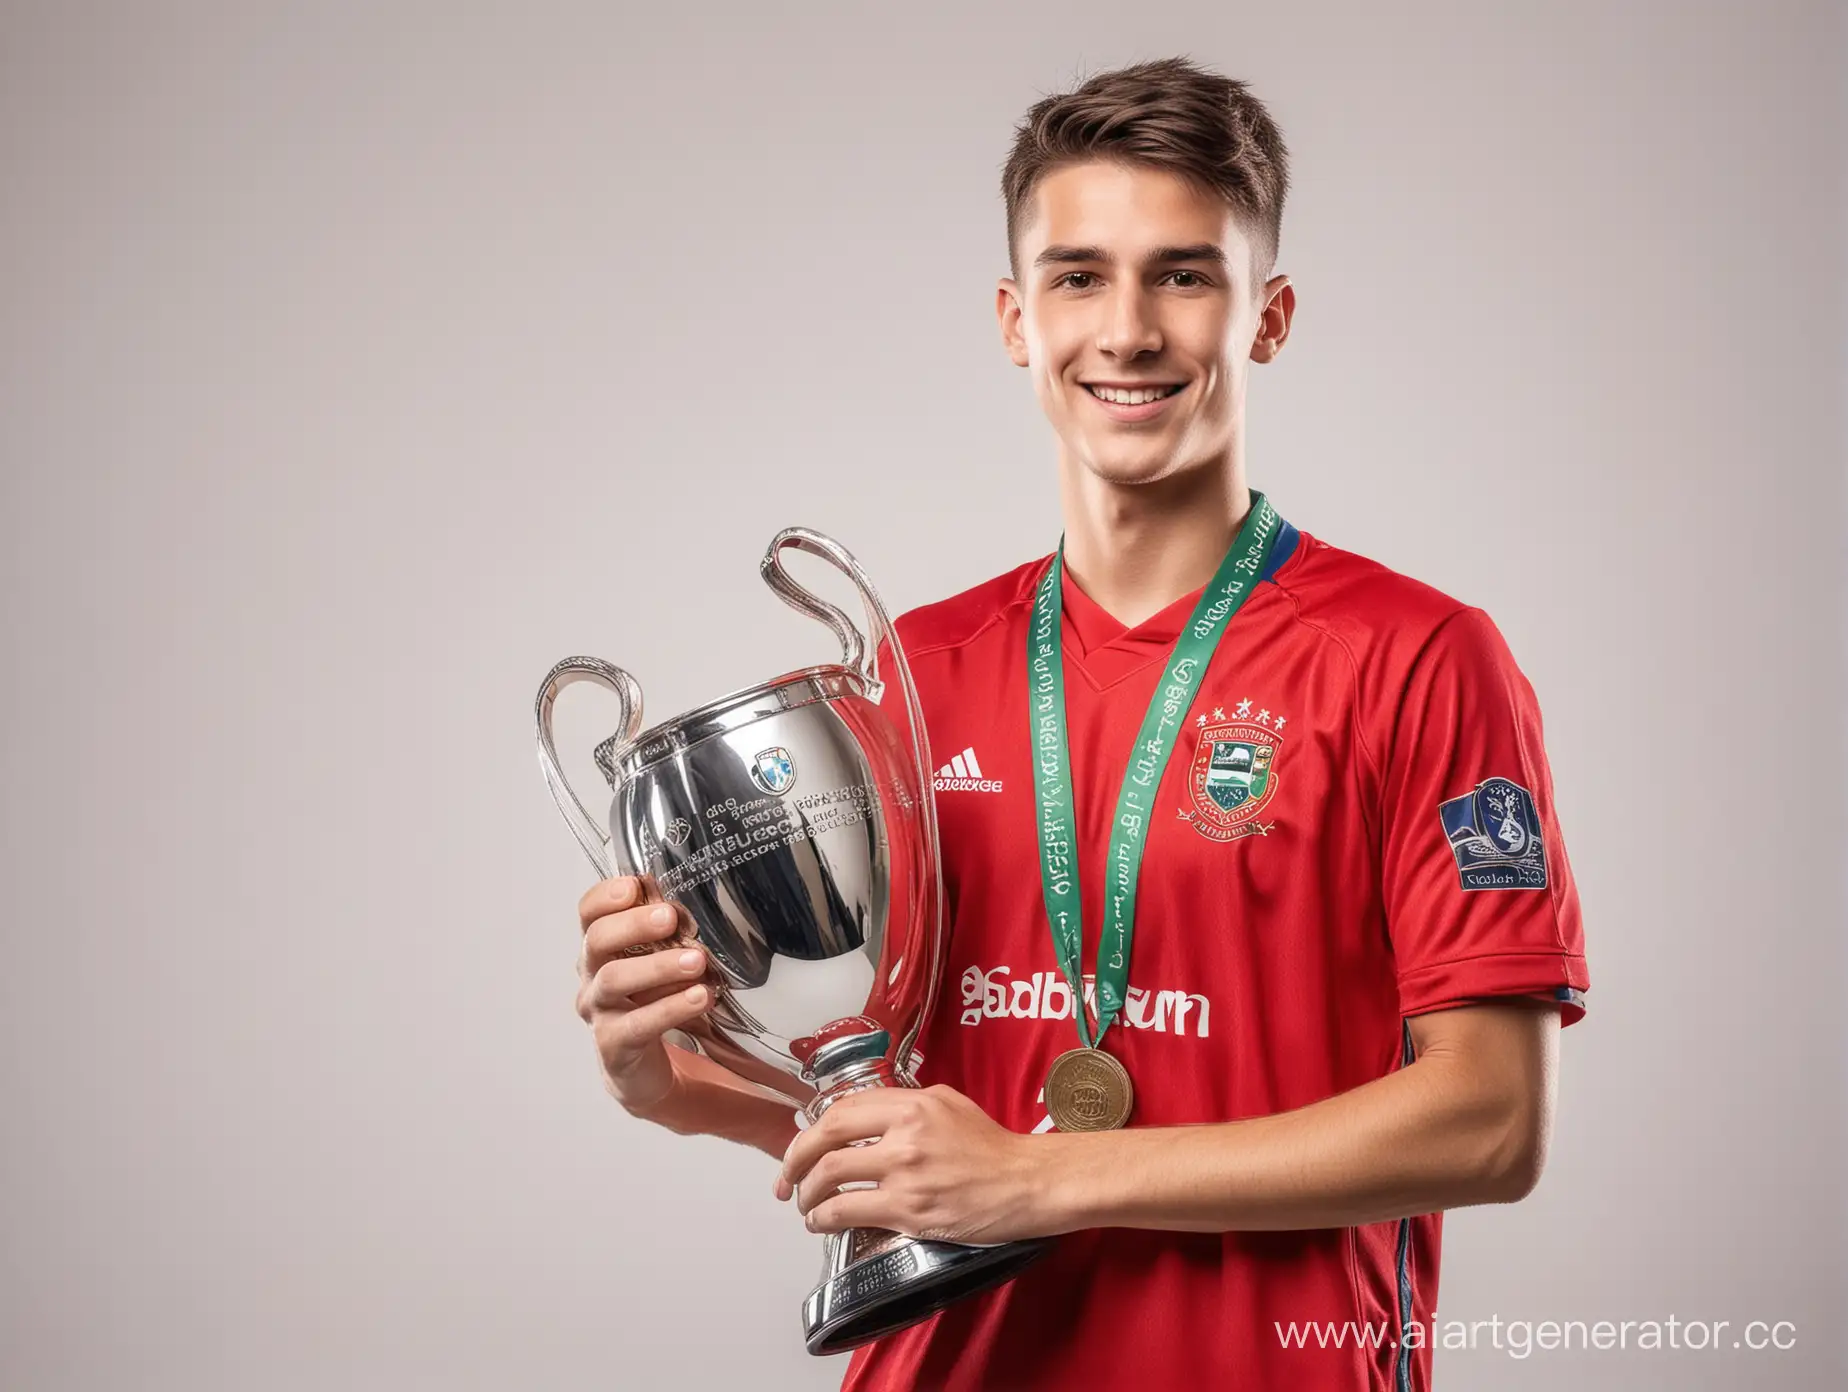 Young-Soccer-Star-Celebrates-Victory-with-Champions-Cup-on-White-Background